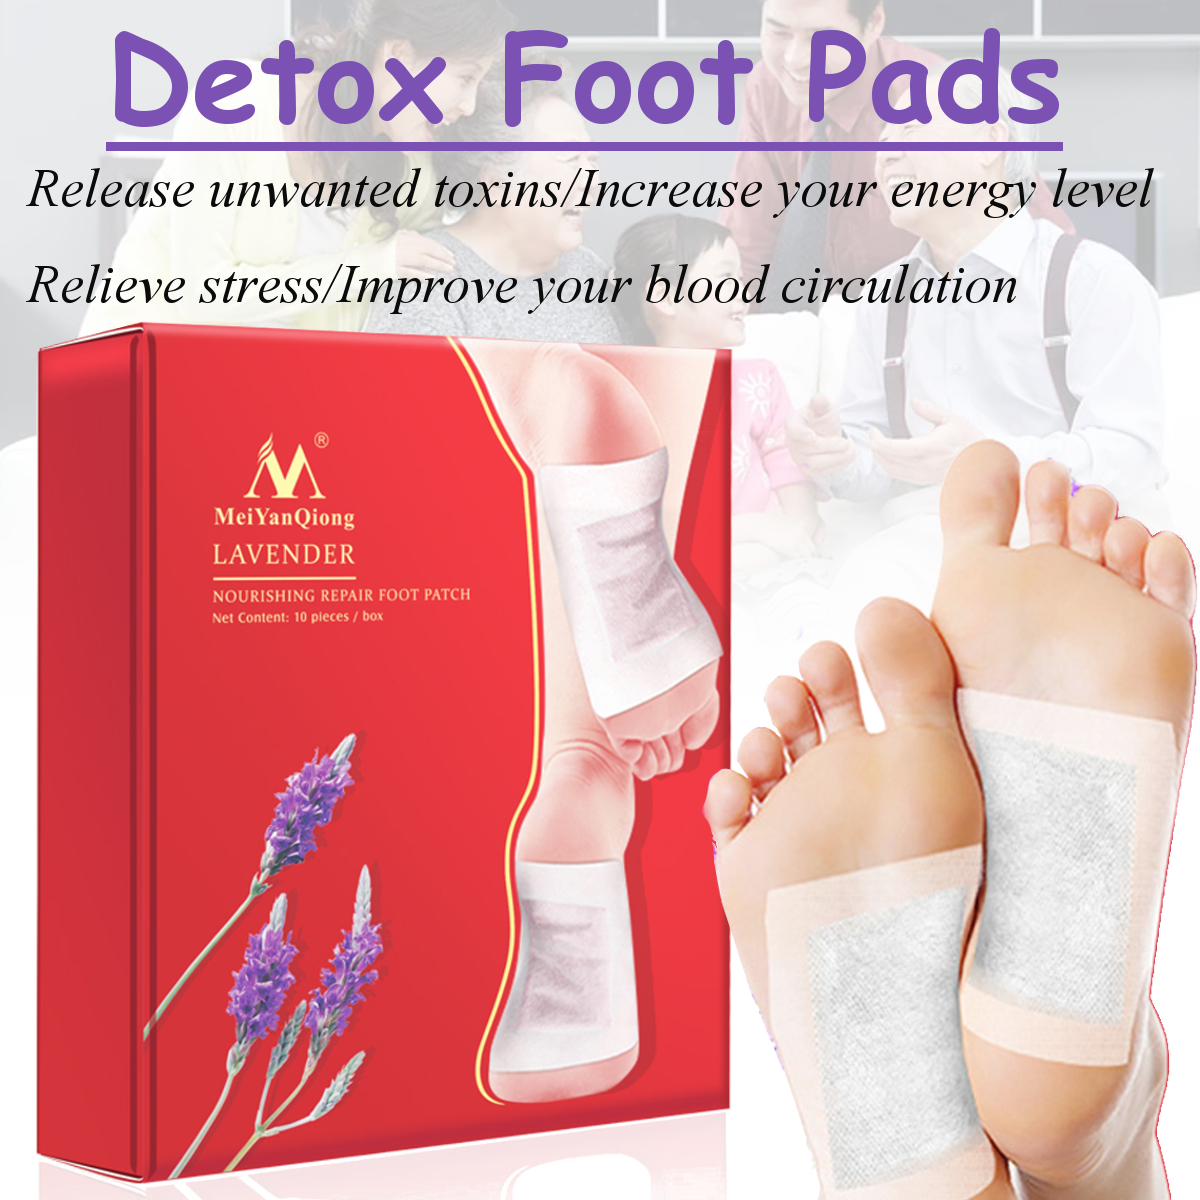 

20Pcs Detox Foot Pads Patches Organic Herbal Cleansing Adhesive Health Care